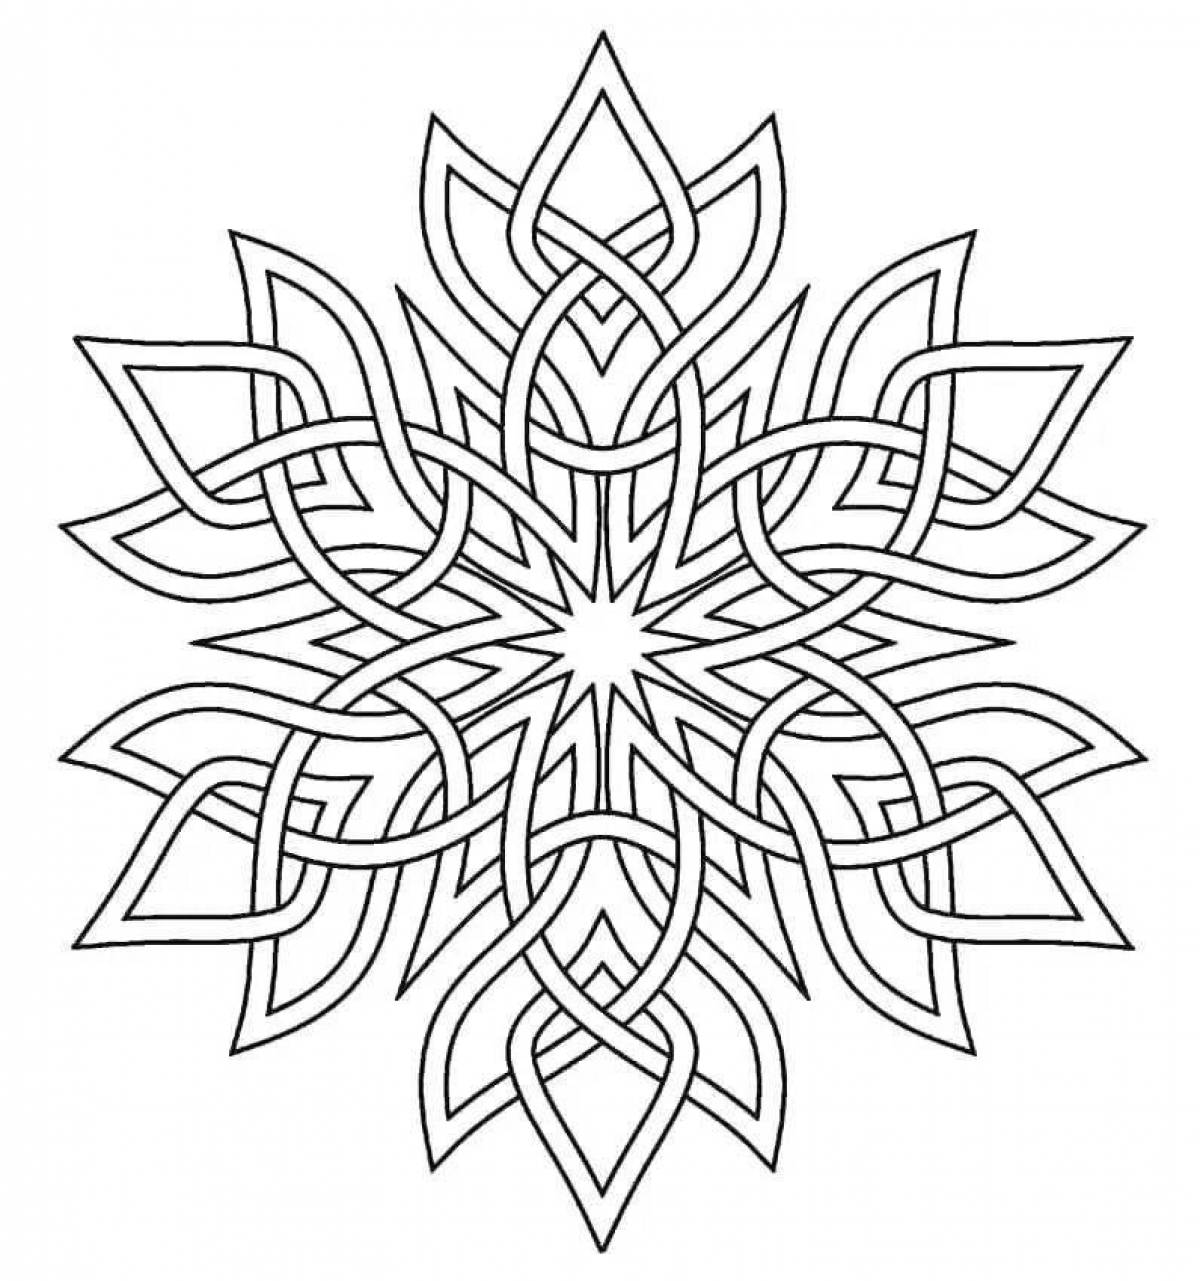 Elegant snowflake coloring book for 4-5 year olds